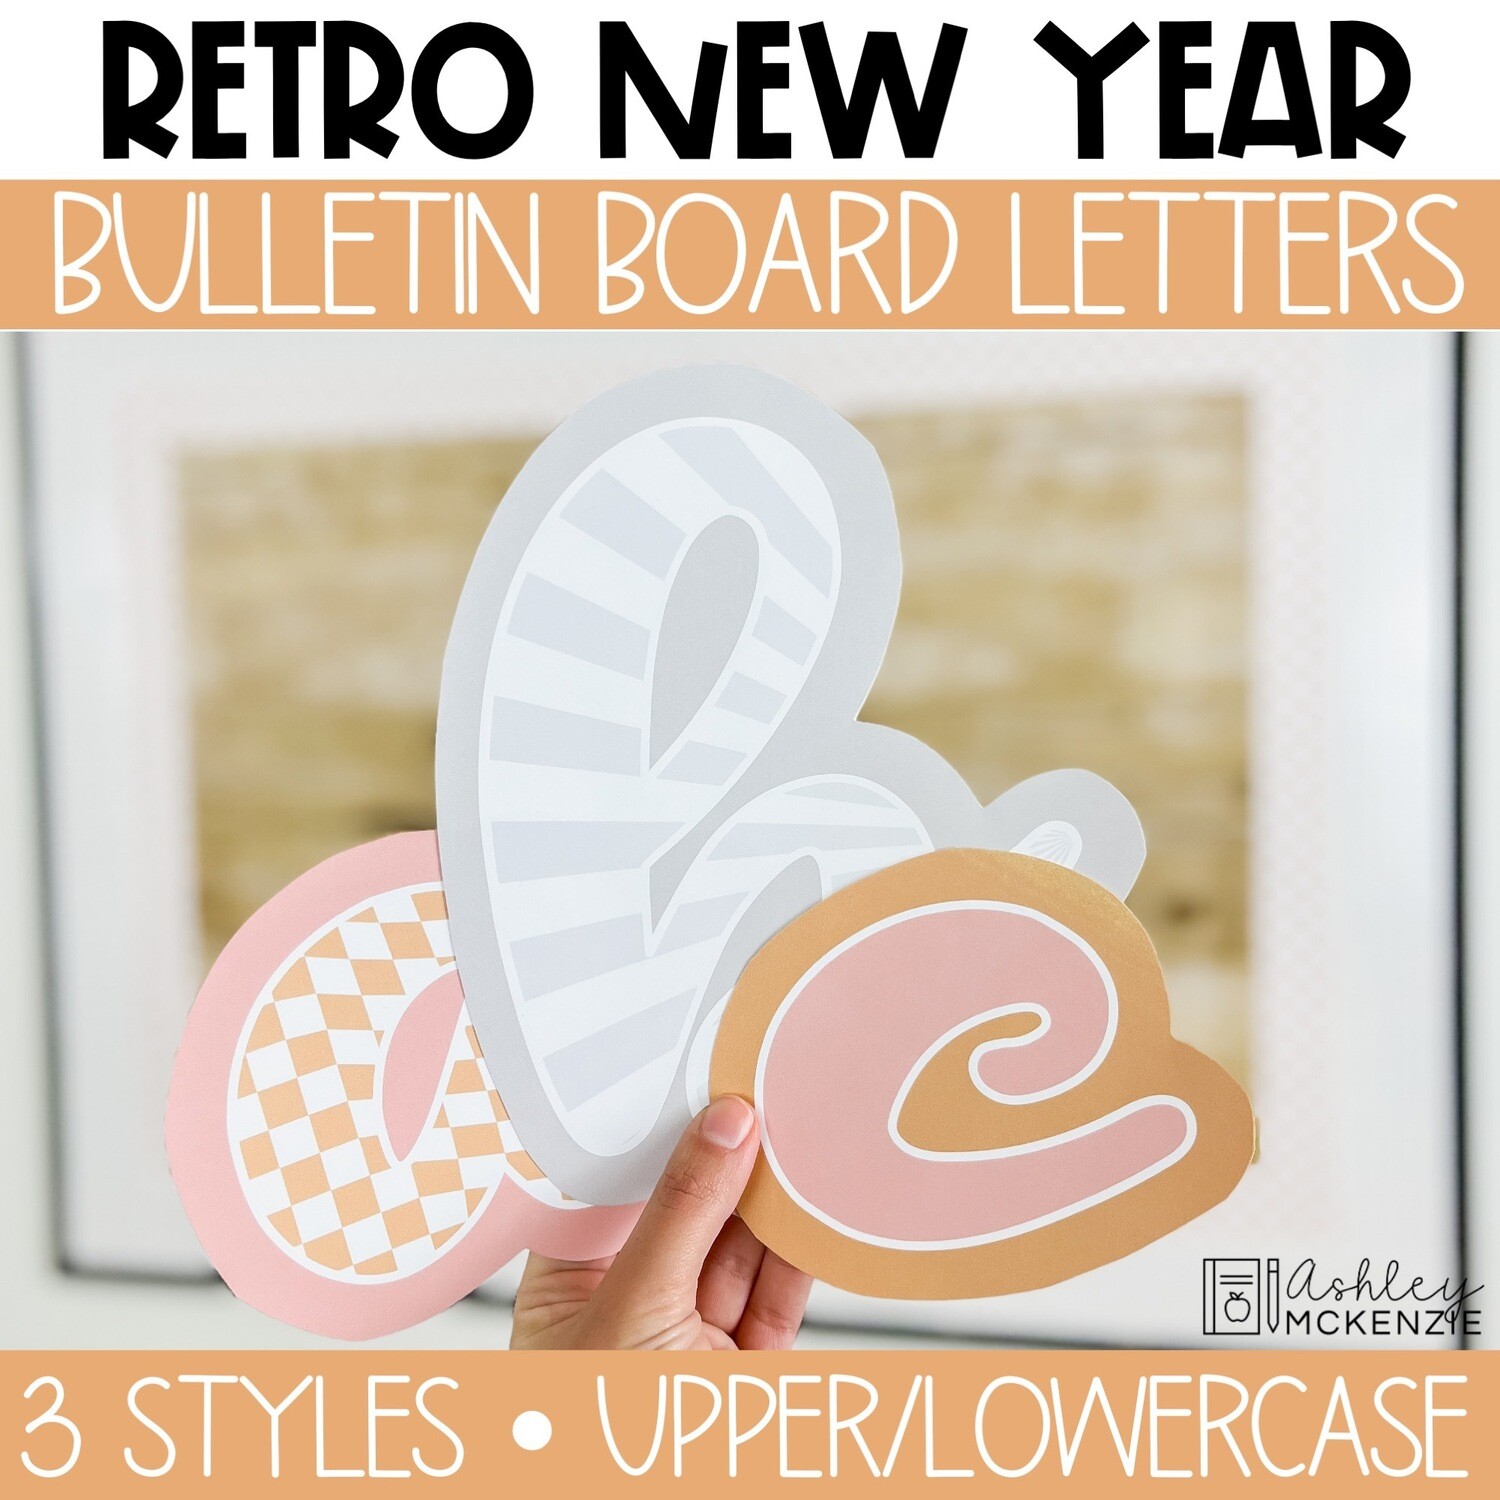 Retro New Year A-Z Bulletin Board Letters to create any saying you